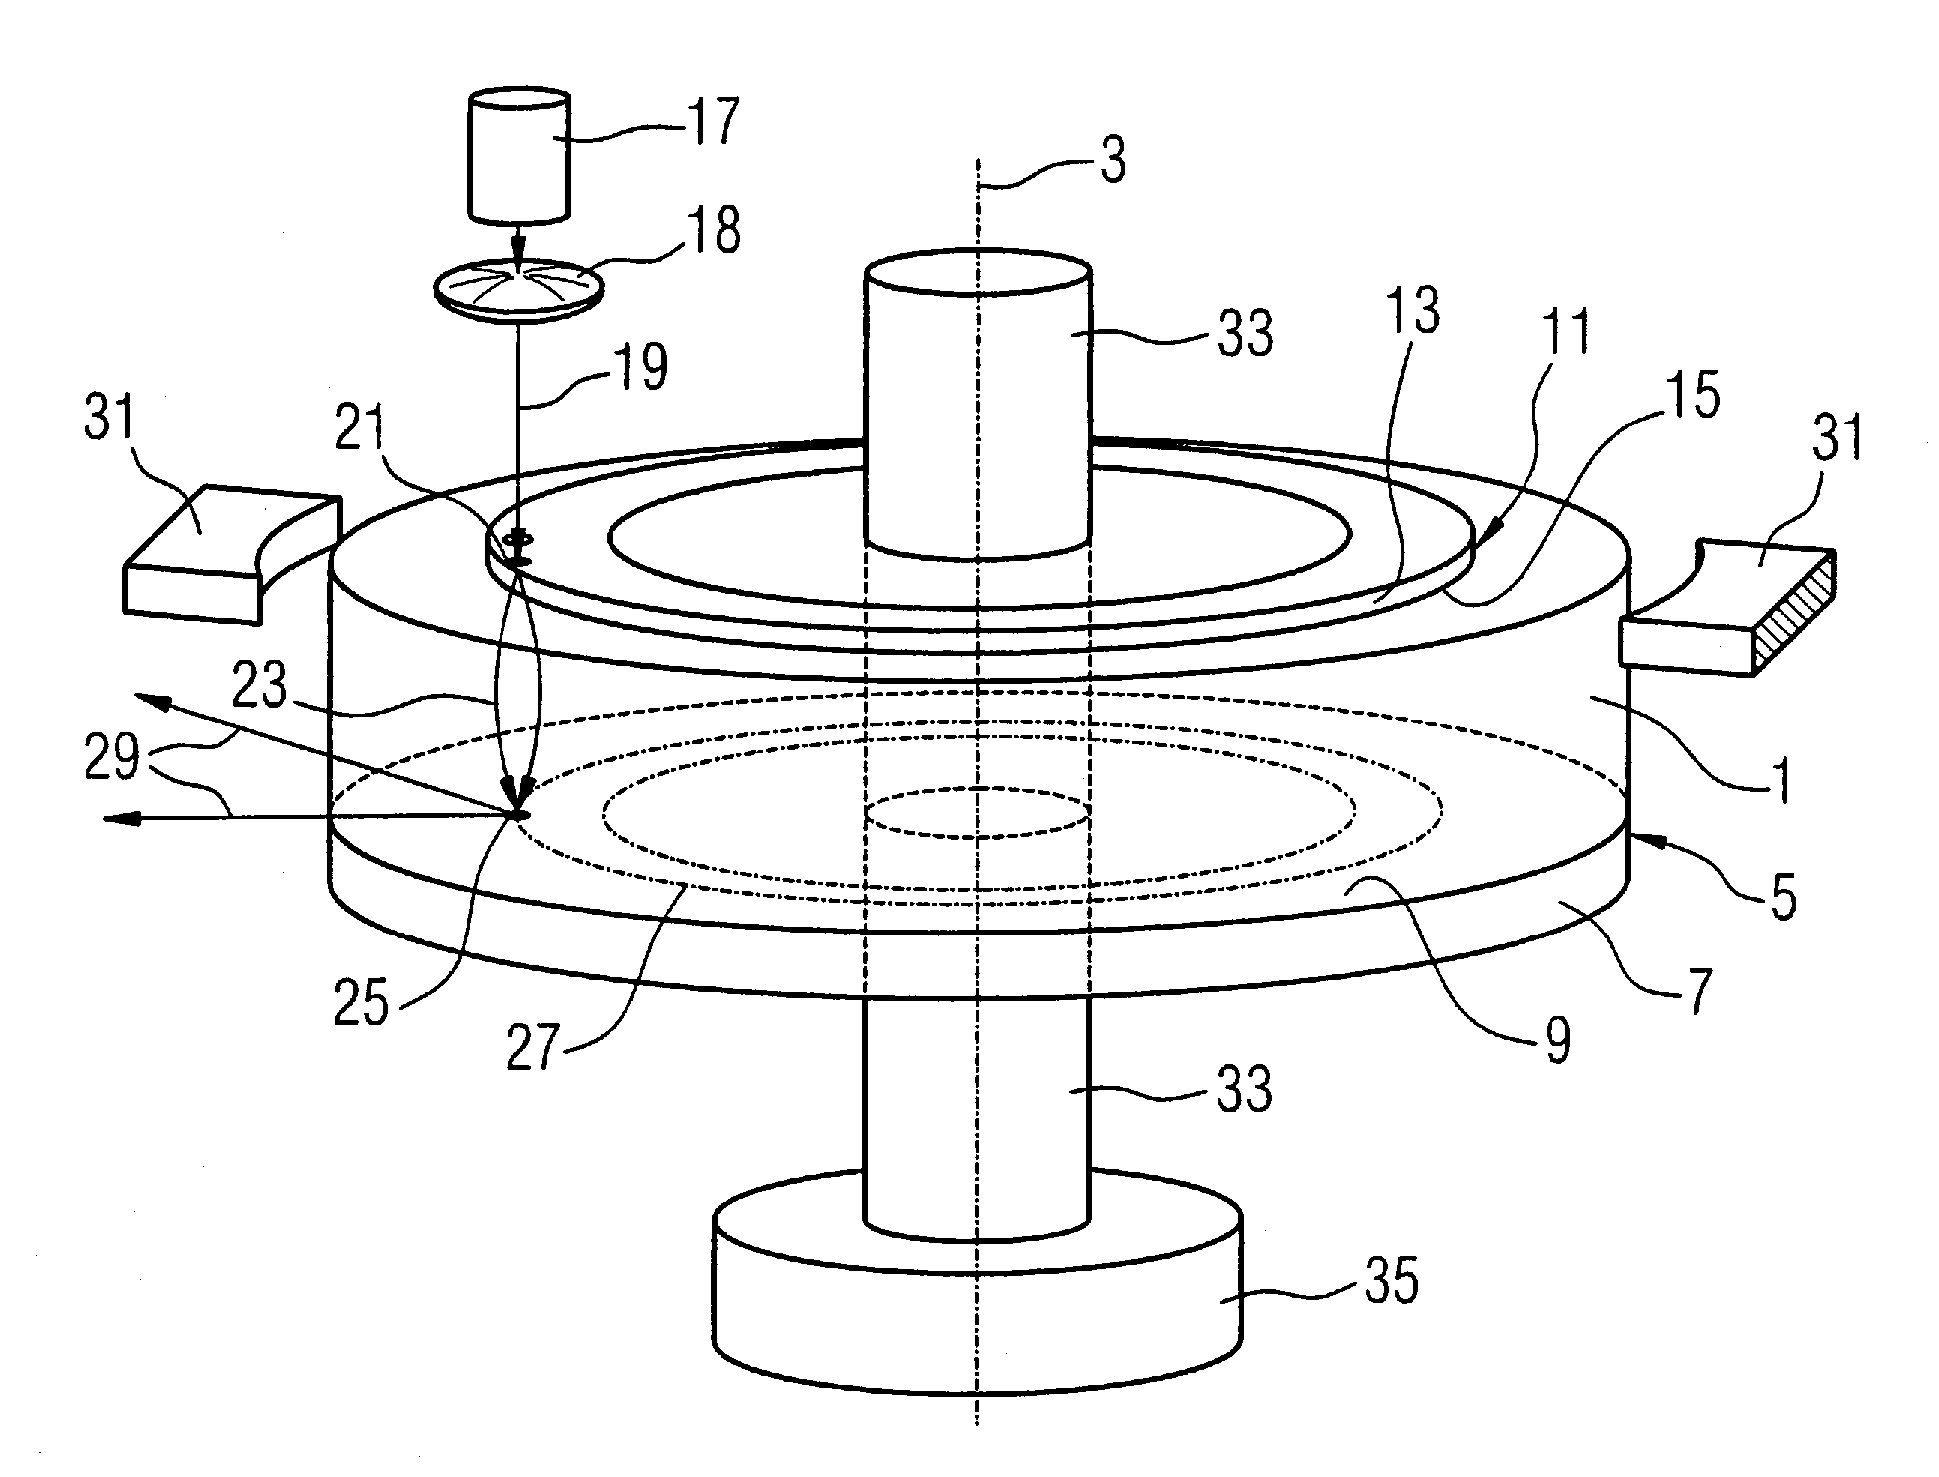 X-ray radiator with a photocathode irradiated with a deflected laser beam